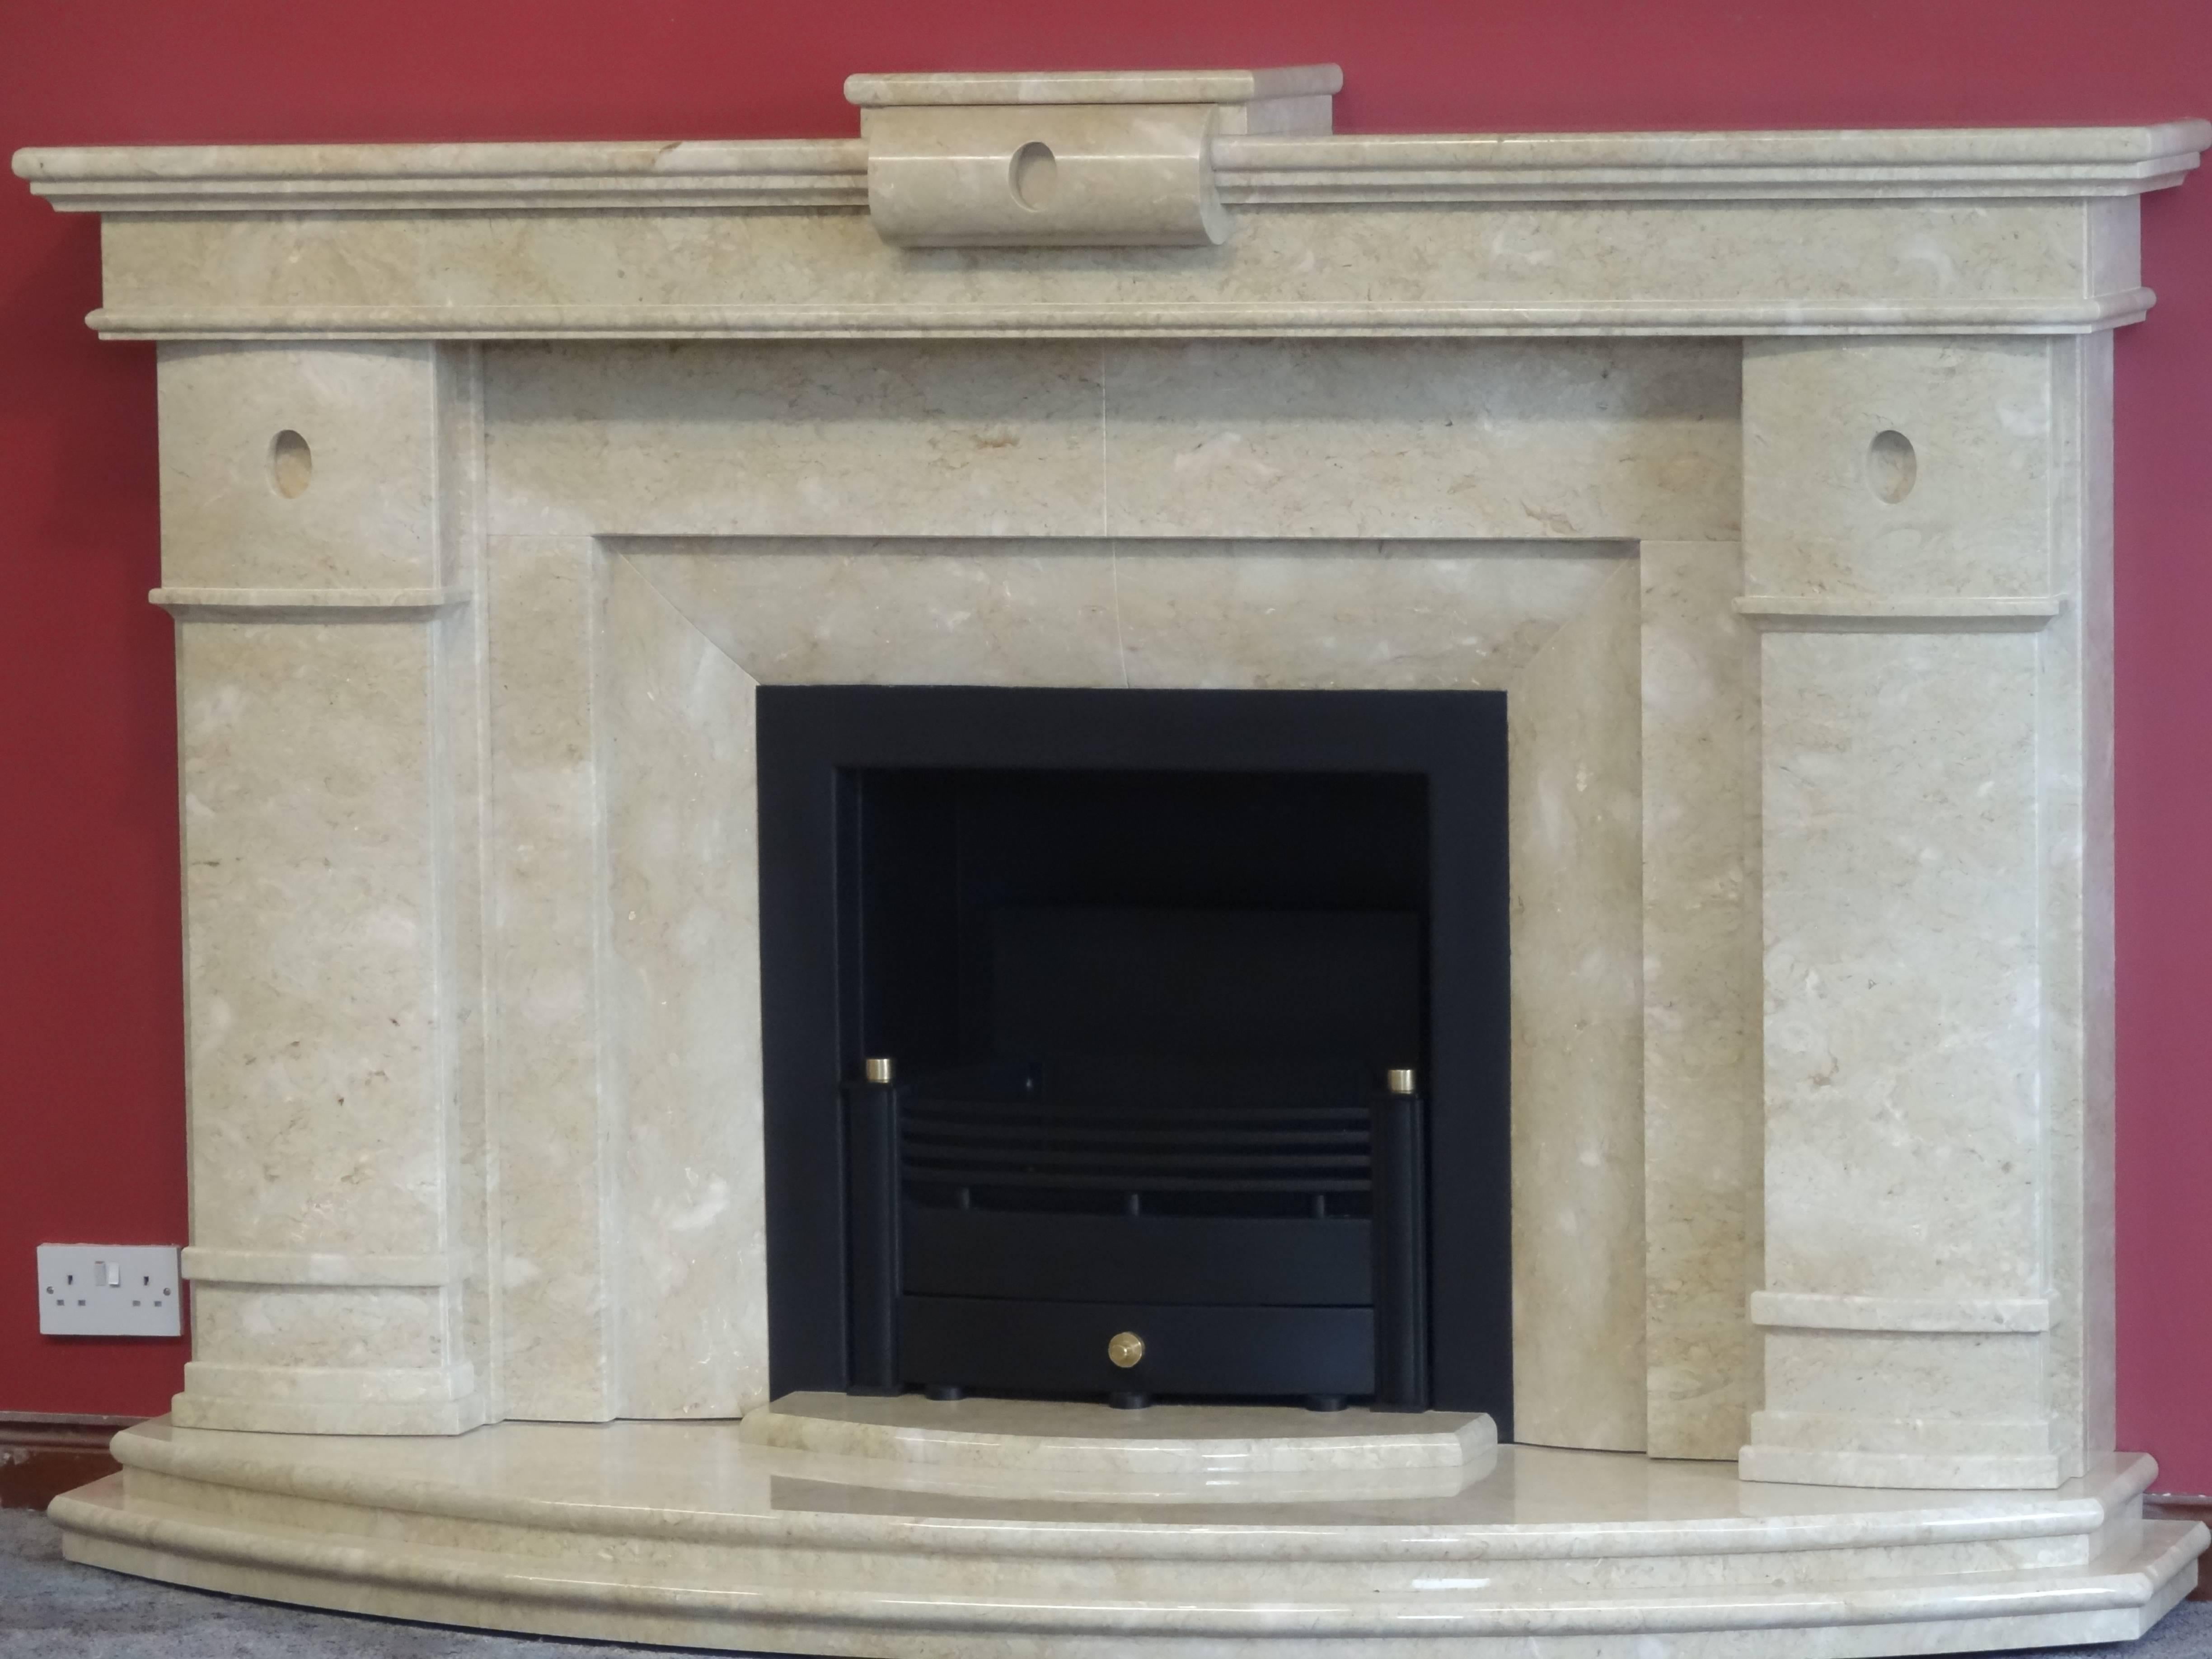 We created this contemporary design from polished Perlato Svevo marble.
This fireplace comprises of the matching marble hearth, metal trim built into the marble insert and the removable metal and brass fire basket.

Measurements:
Mantel 78